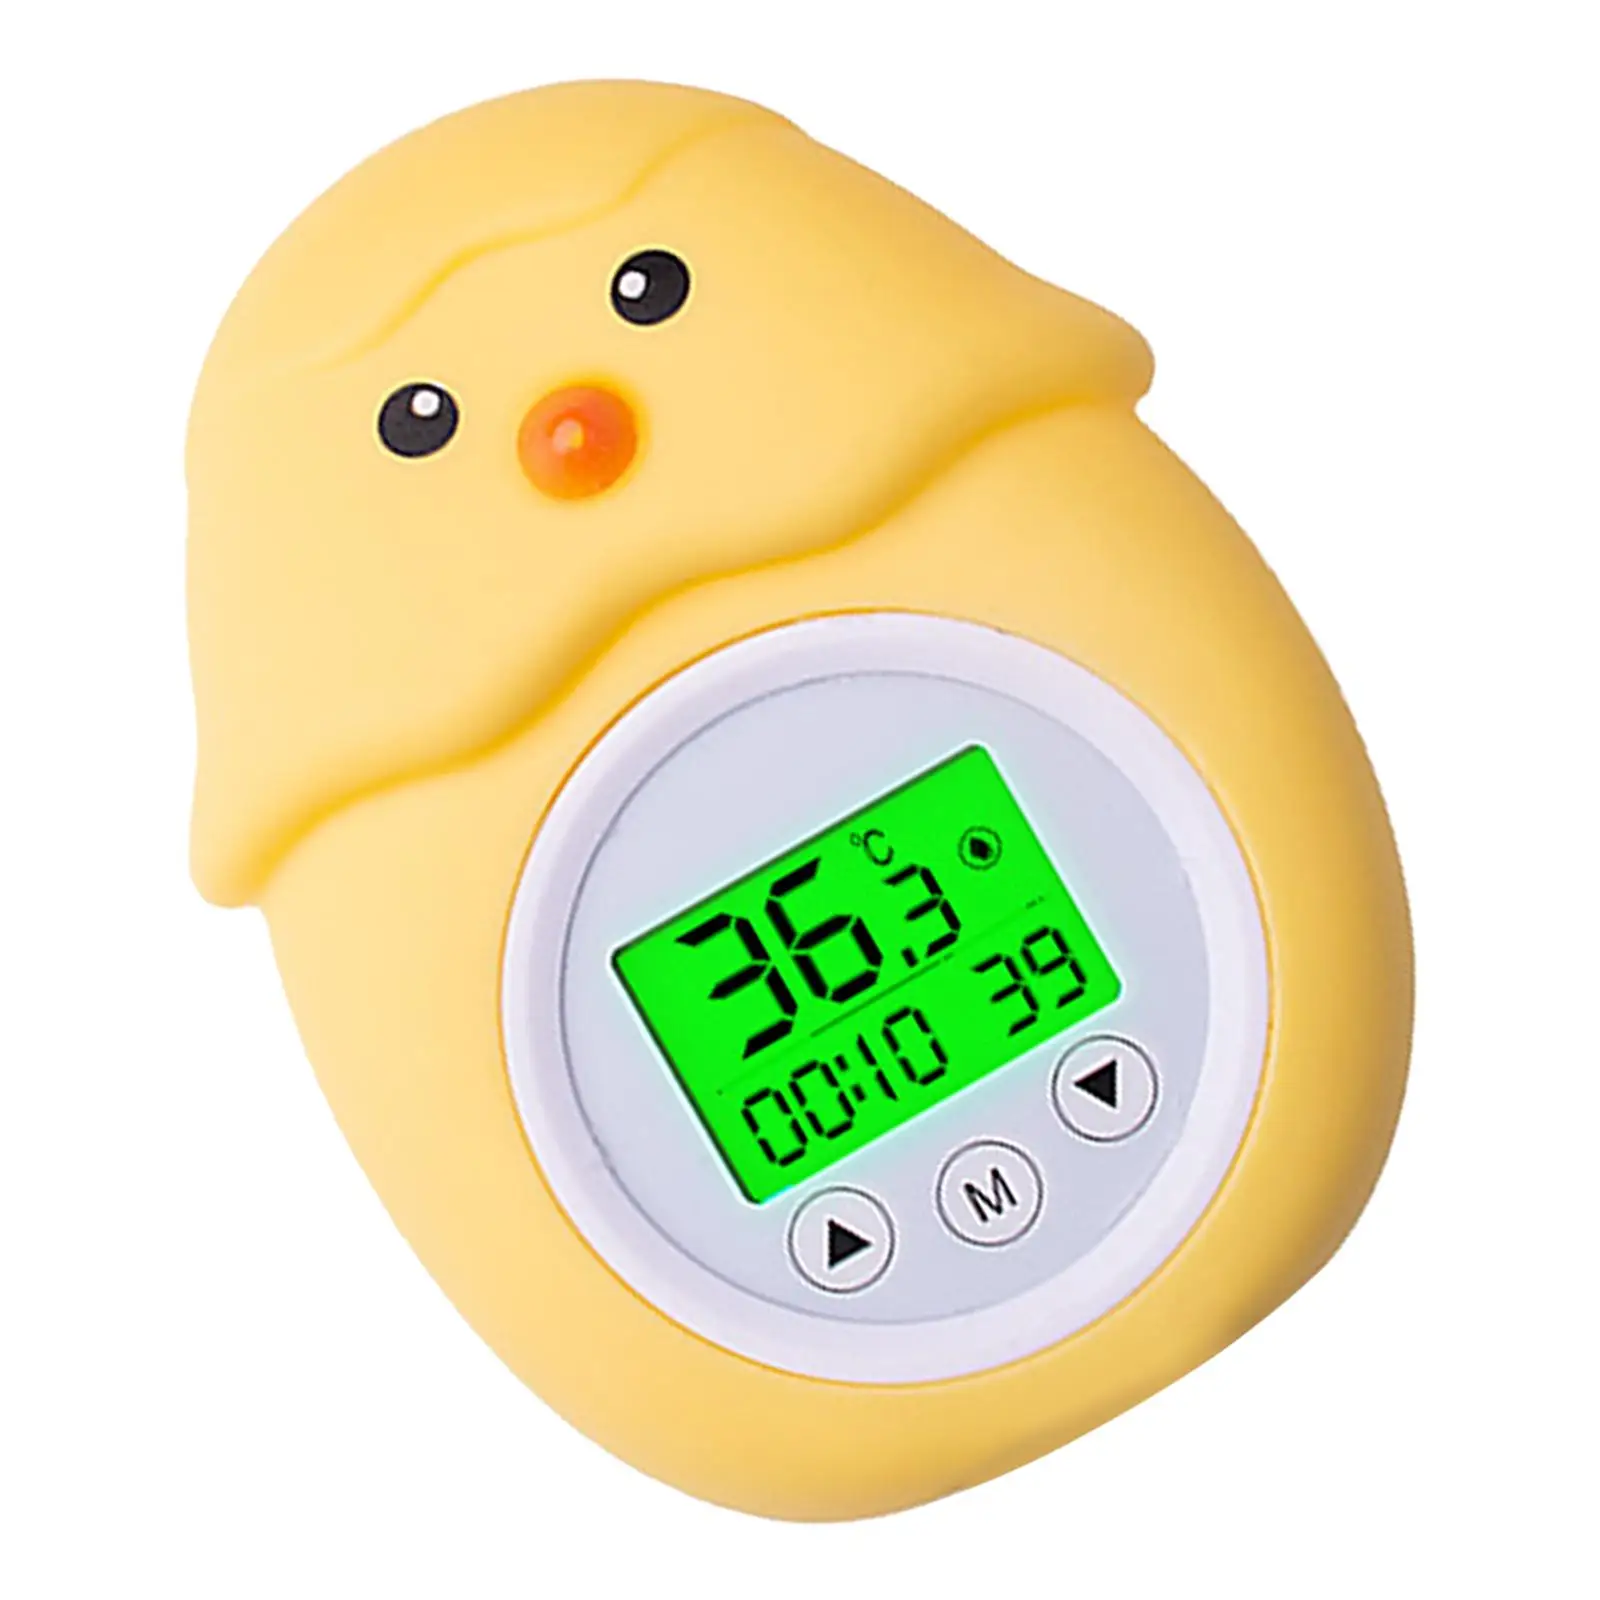 Bathing Temperature Measurement Toy Bath for Shower Toddlers Kids